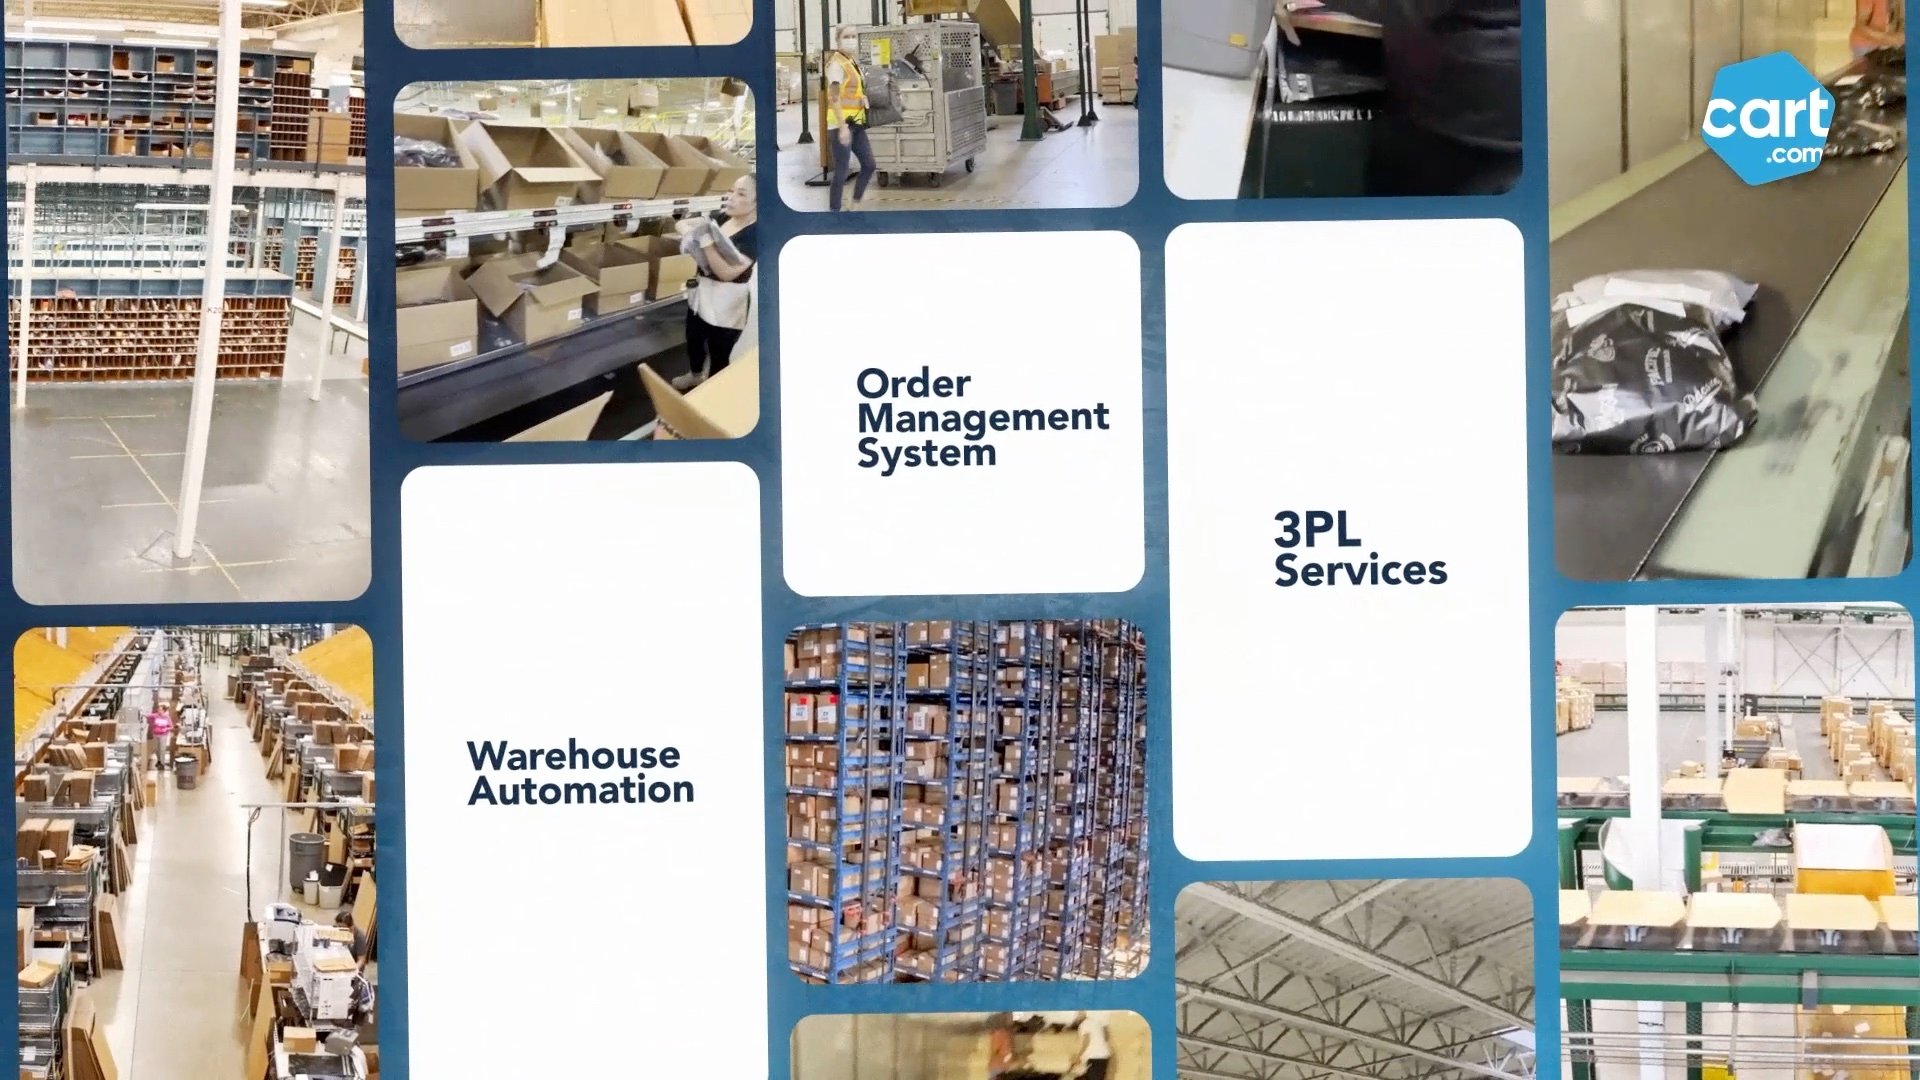 Omnichannel Order Fulfillment and 3PL Services